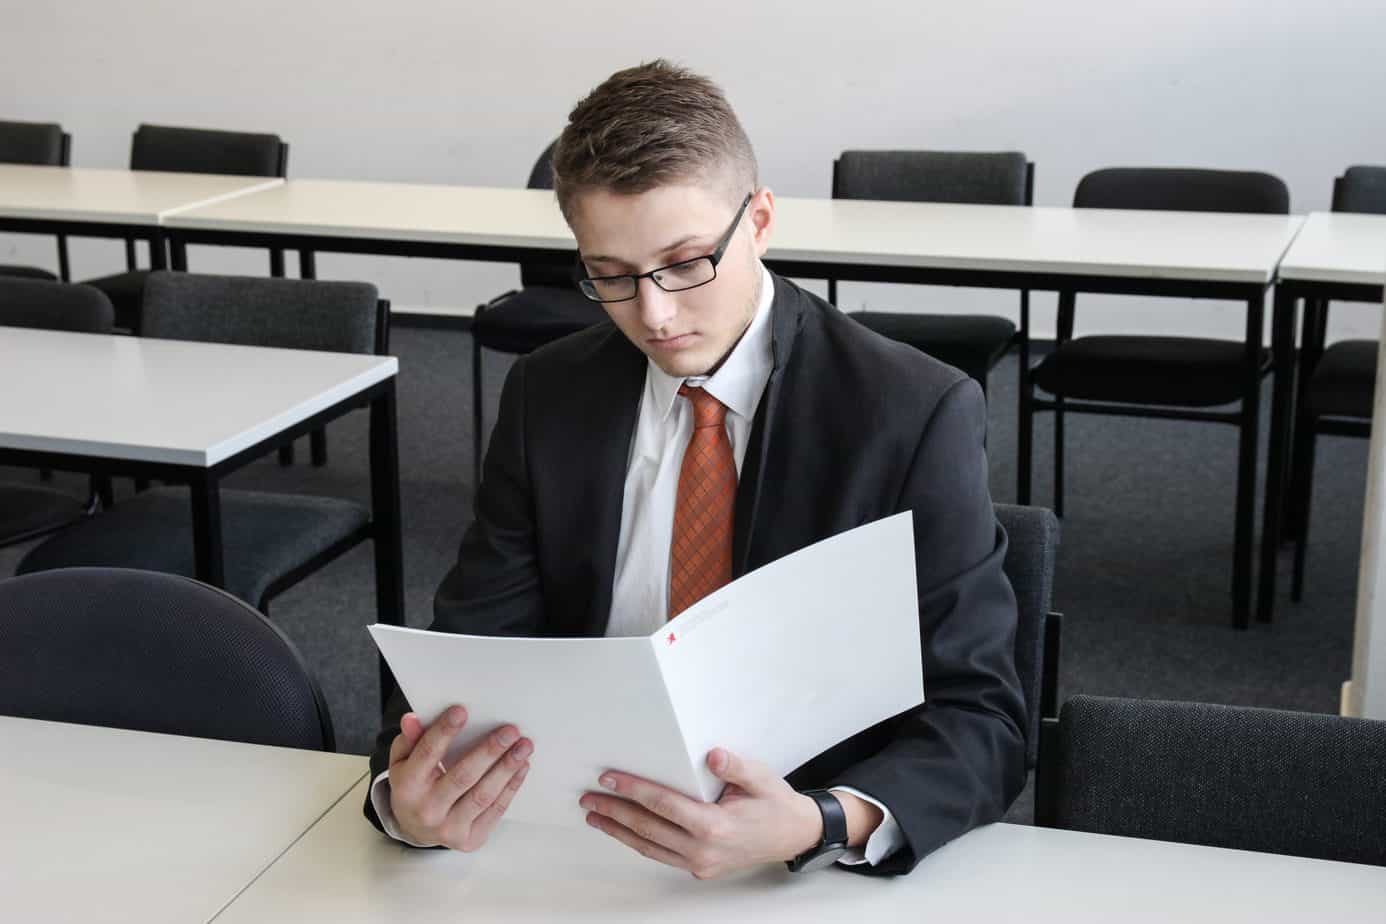 10 Useful Job Interview Questions and How to Answer them in 2023